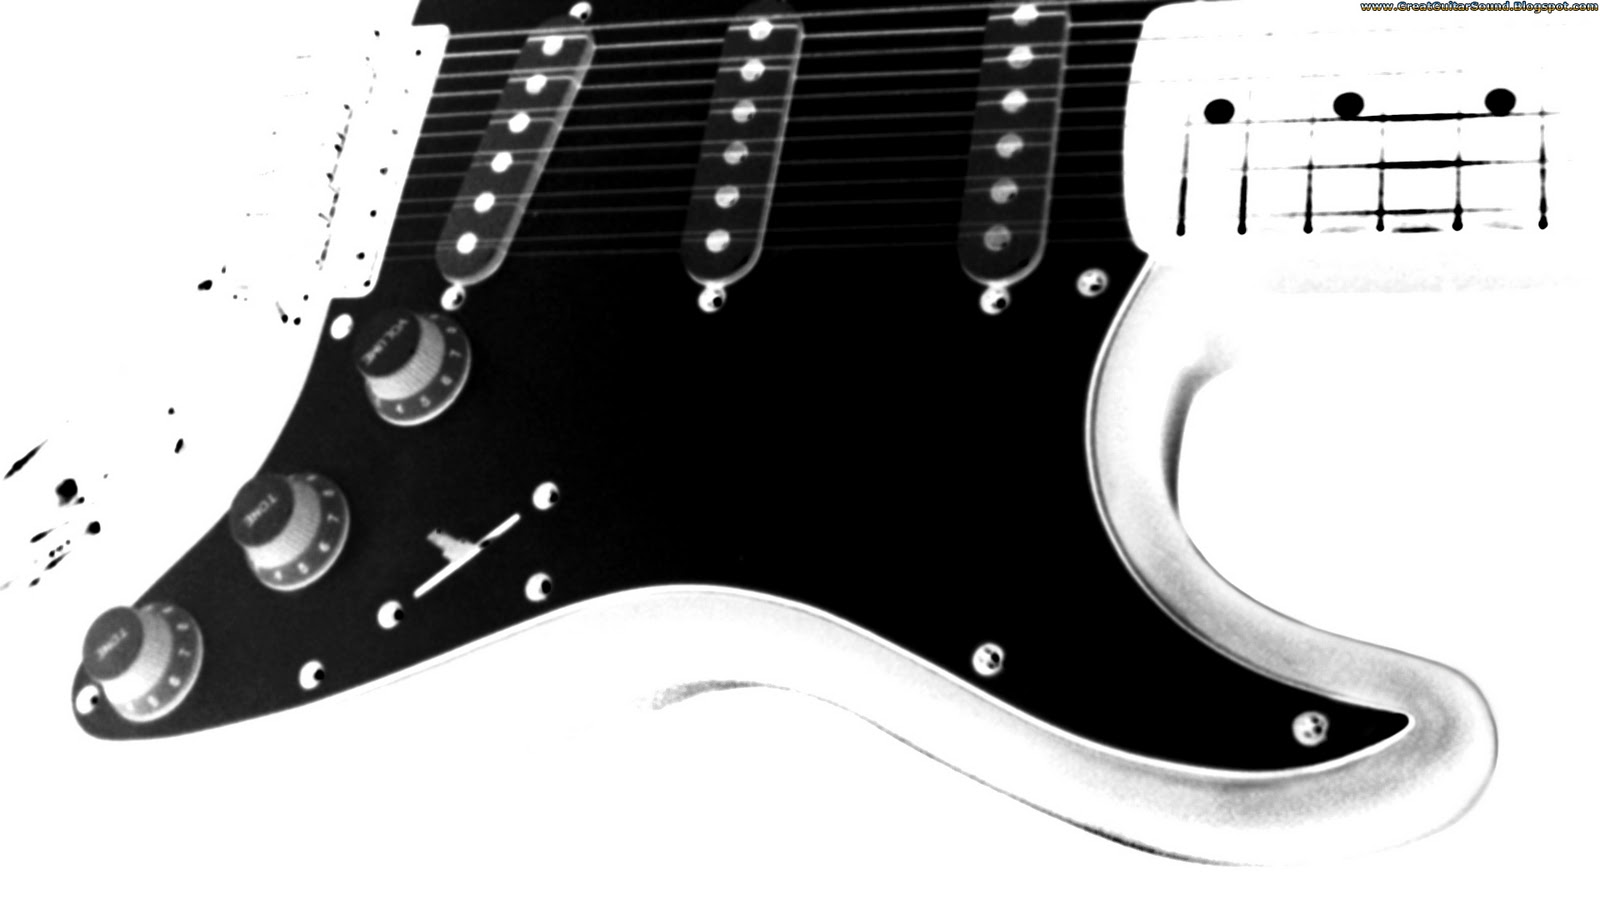 Guitar Wallpaper White And Black Fender Stratocaster Electric